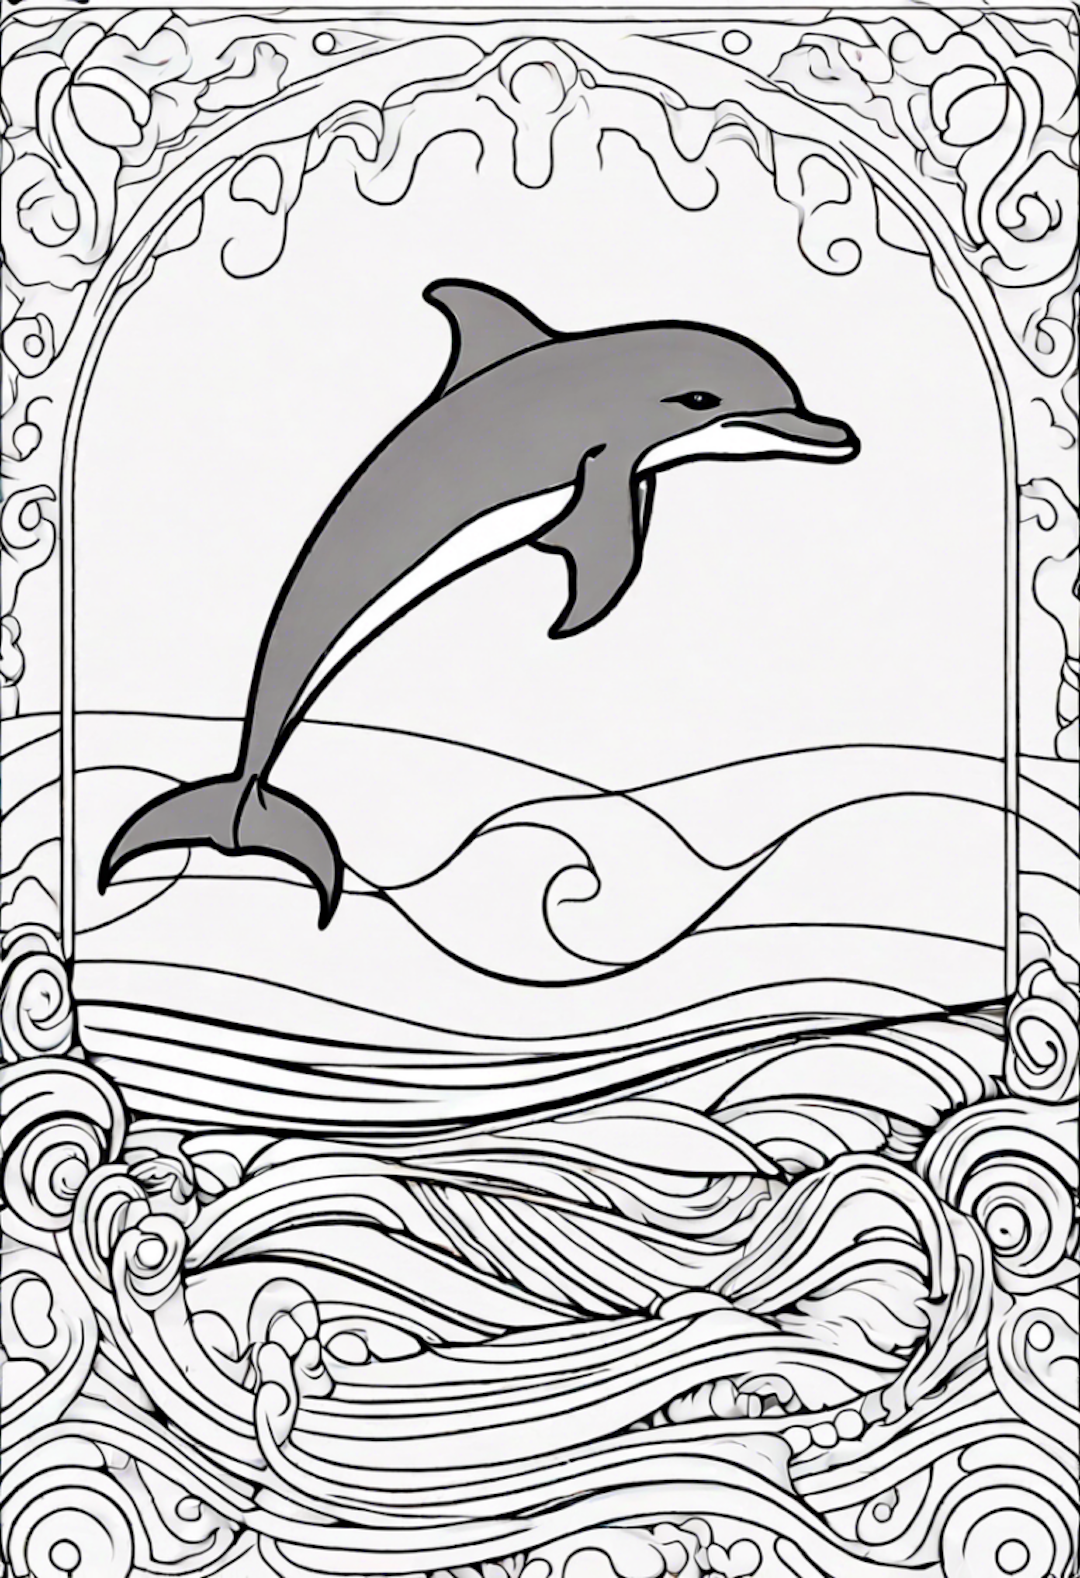 Jumping Dolphin Over Waves Coloring Page coloring pages